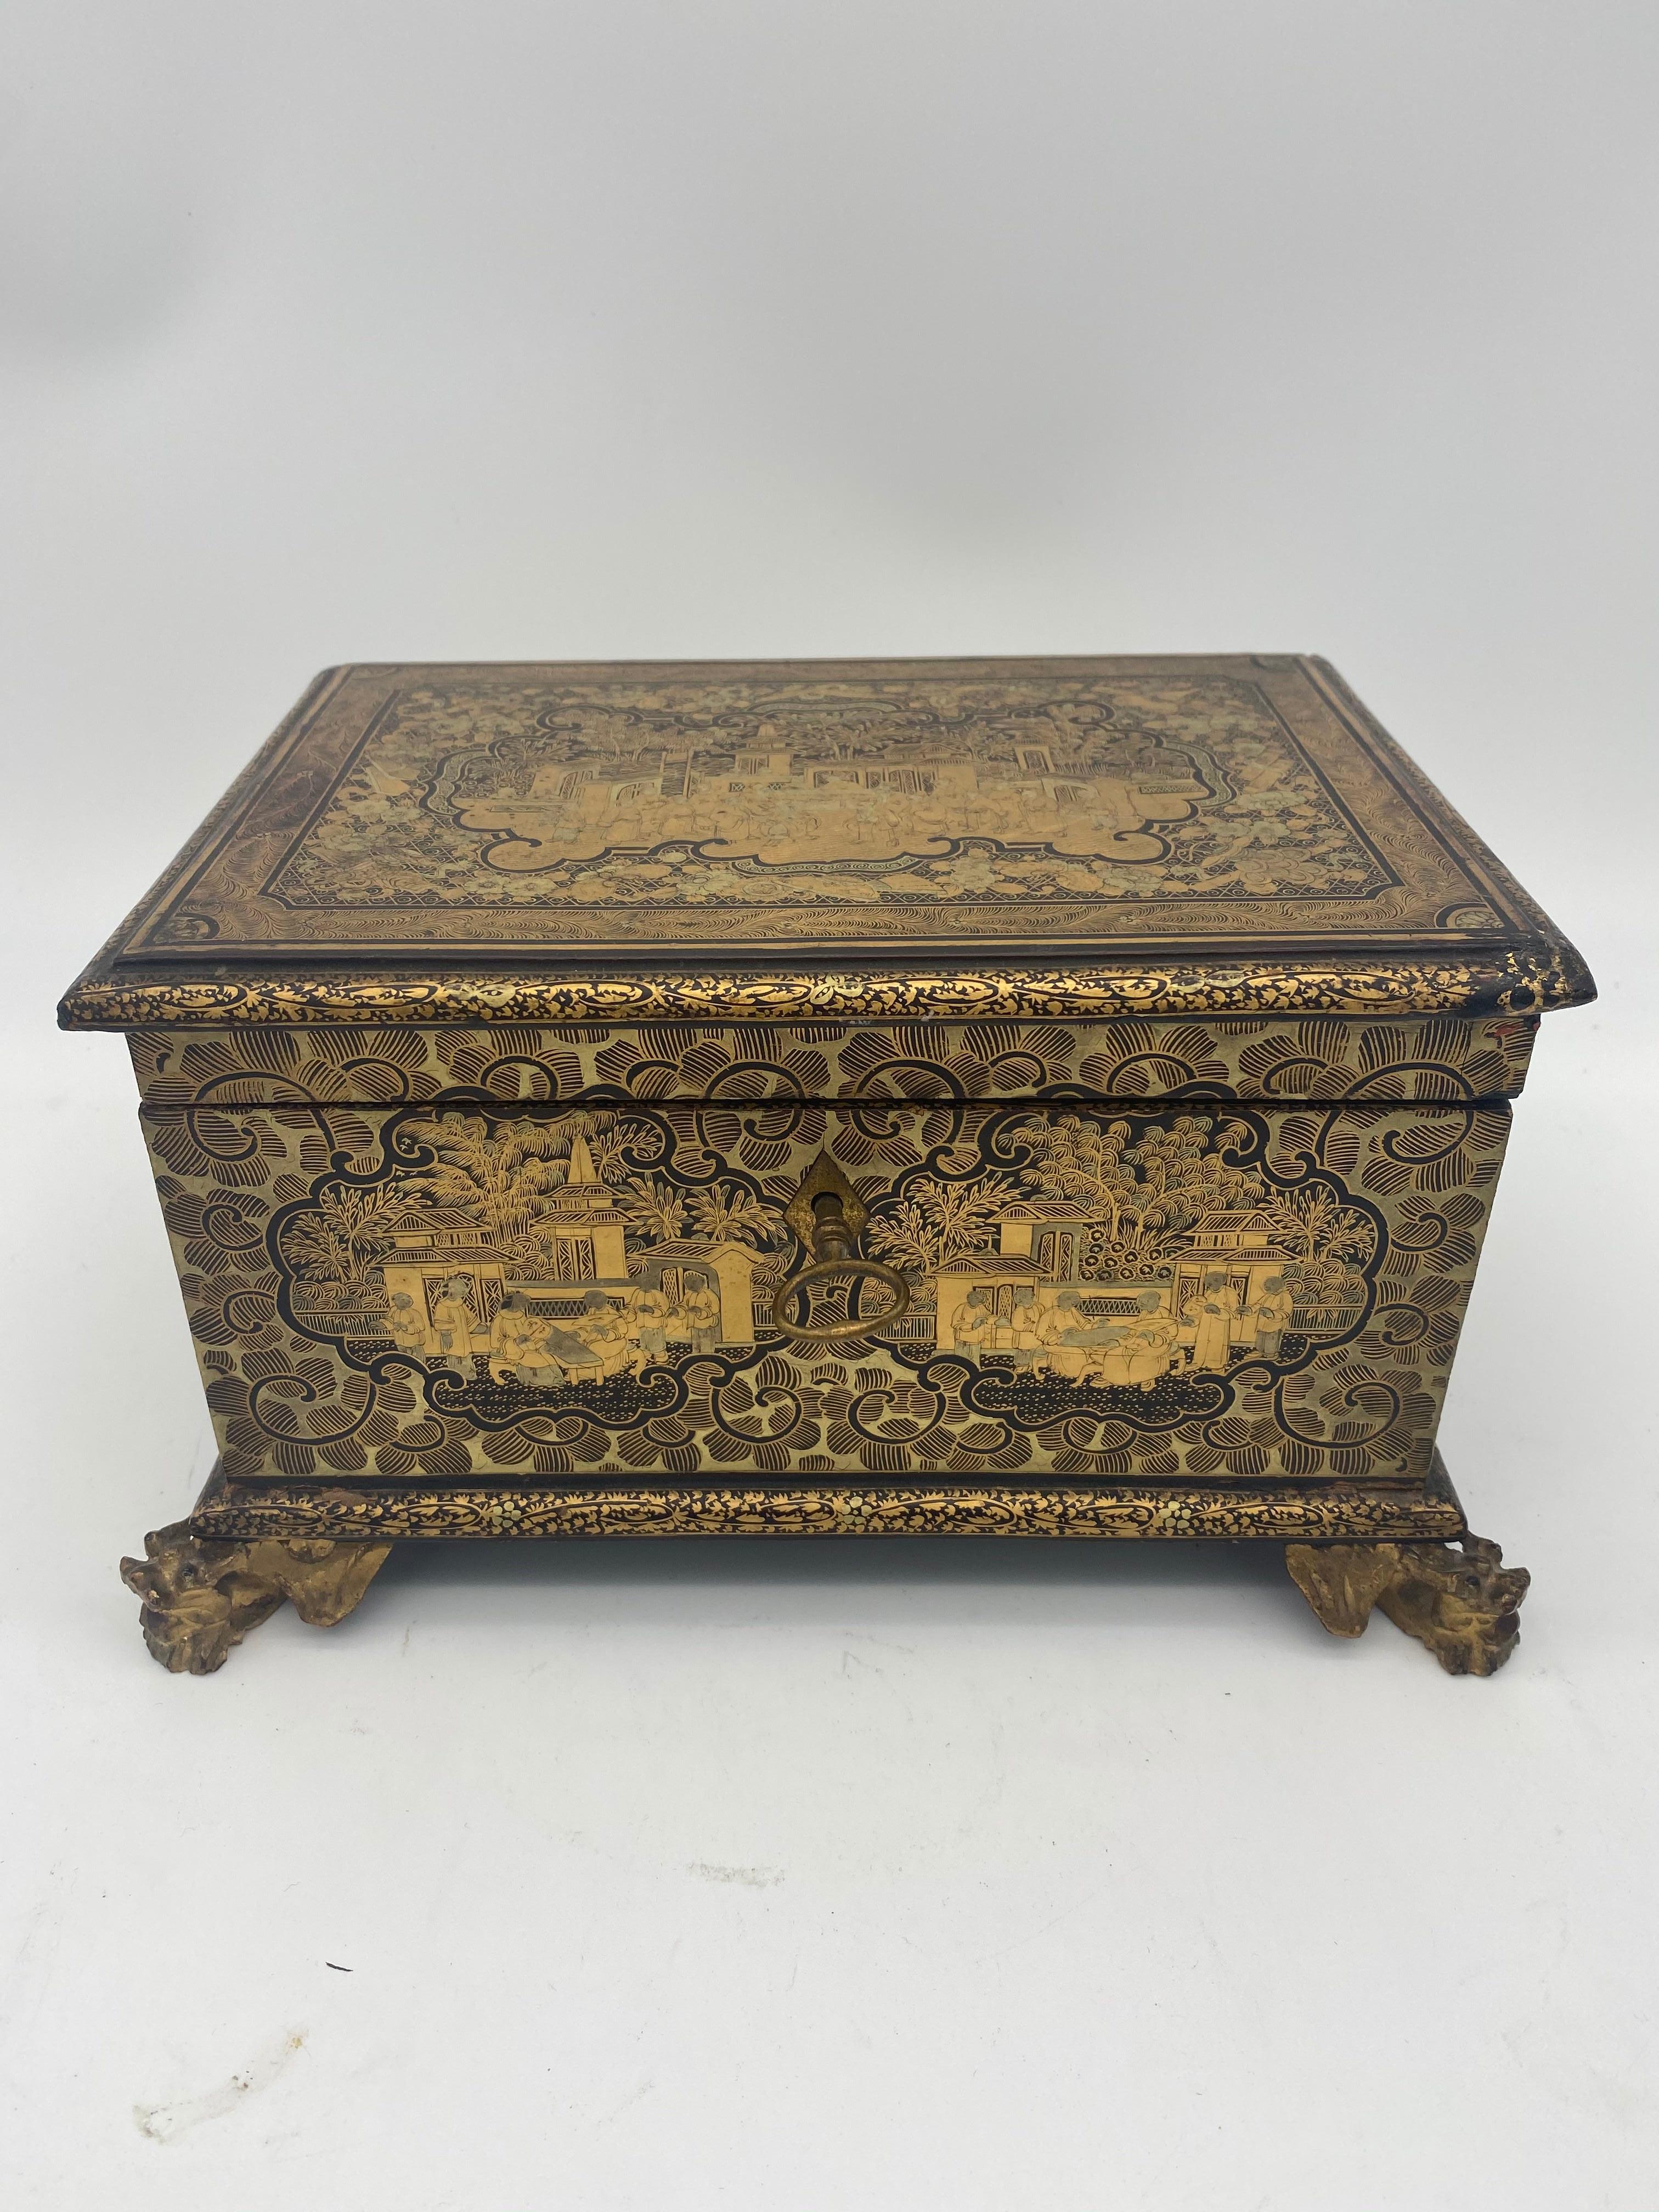 19th Century Golden Black Lacquer Chinese Jewelry Box with Dragon Feet In Good Condition For Sale In Brea, CA